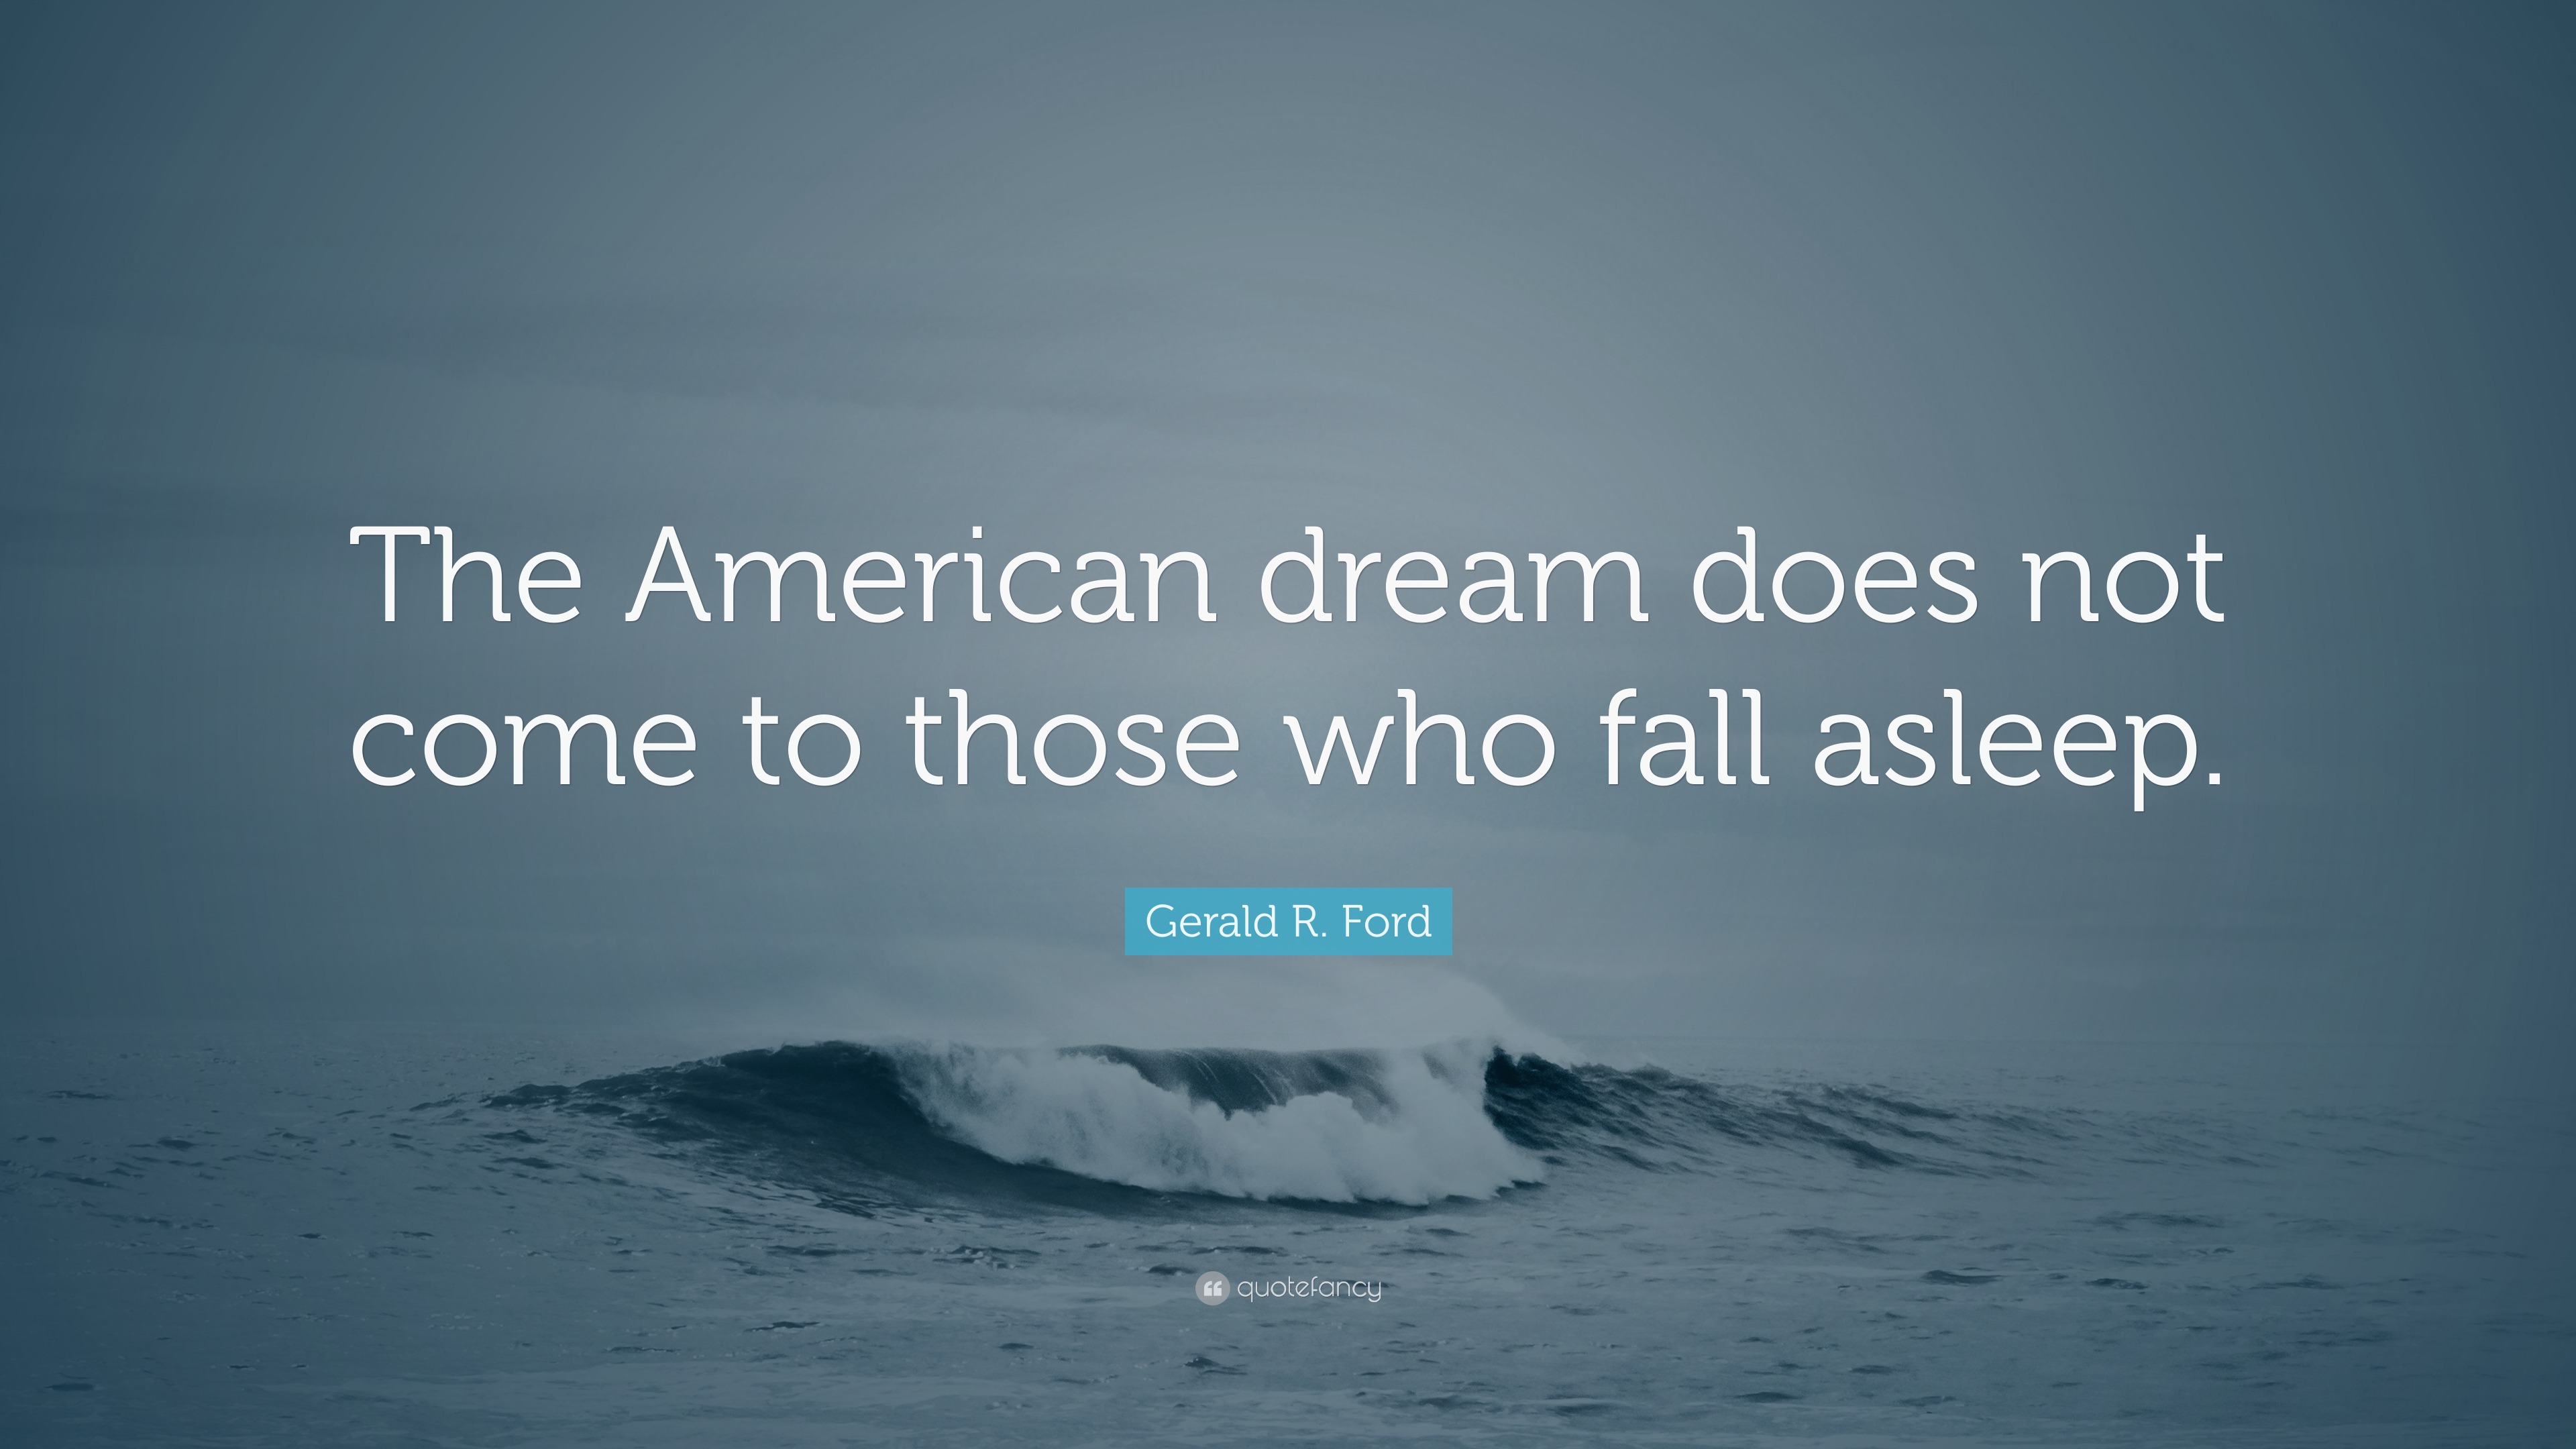 Gerald R. Ford Quote: “The American dream does not come to those who ...